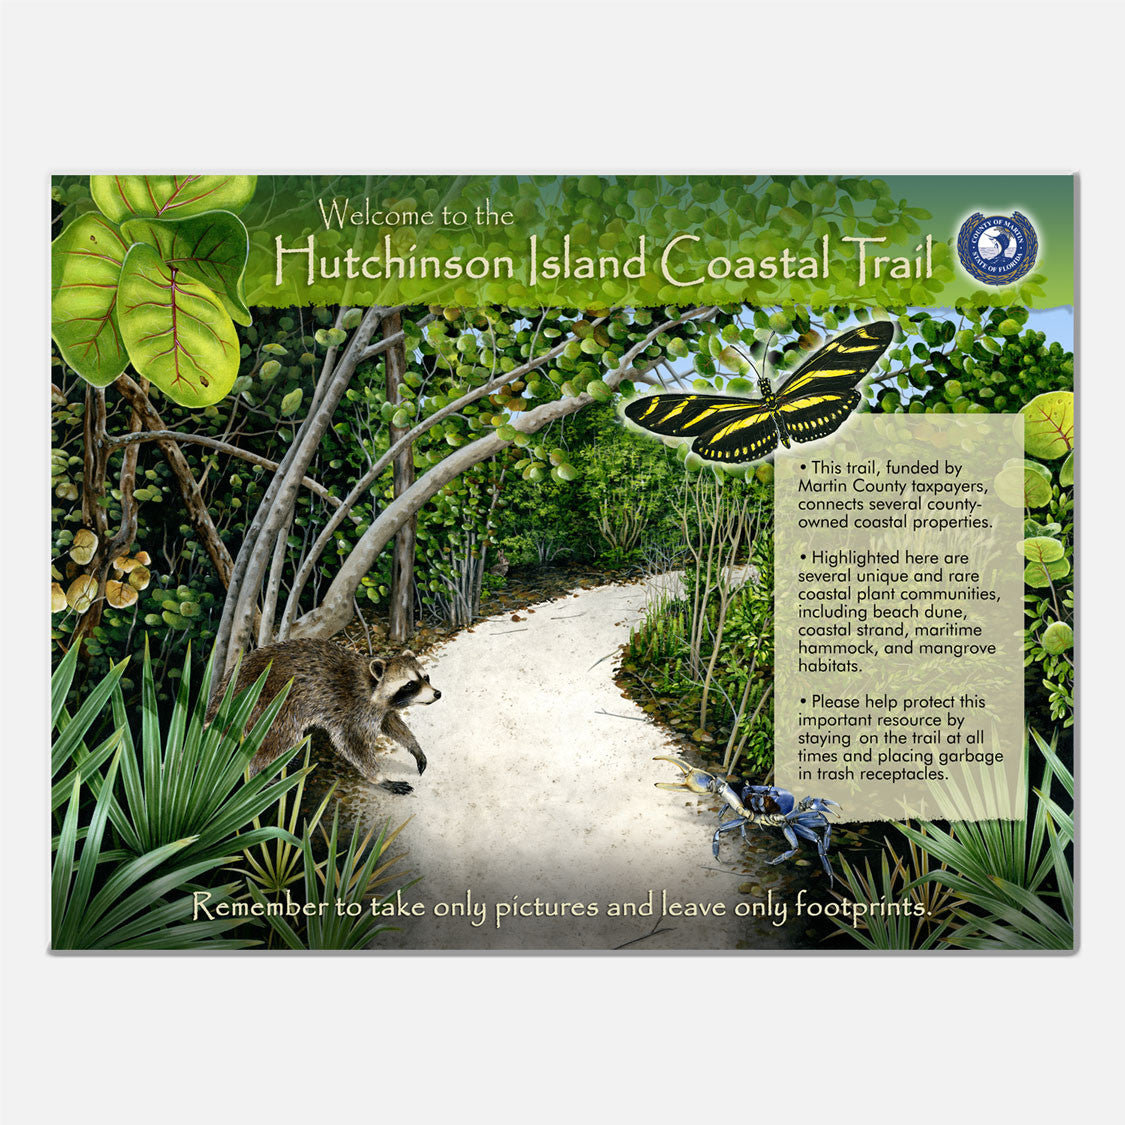 This beautifully illustrated environmental sign introduces the Hutchinson Island Coastal Trail in southeast Florida.